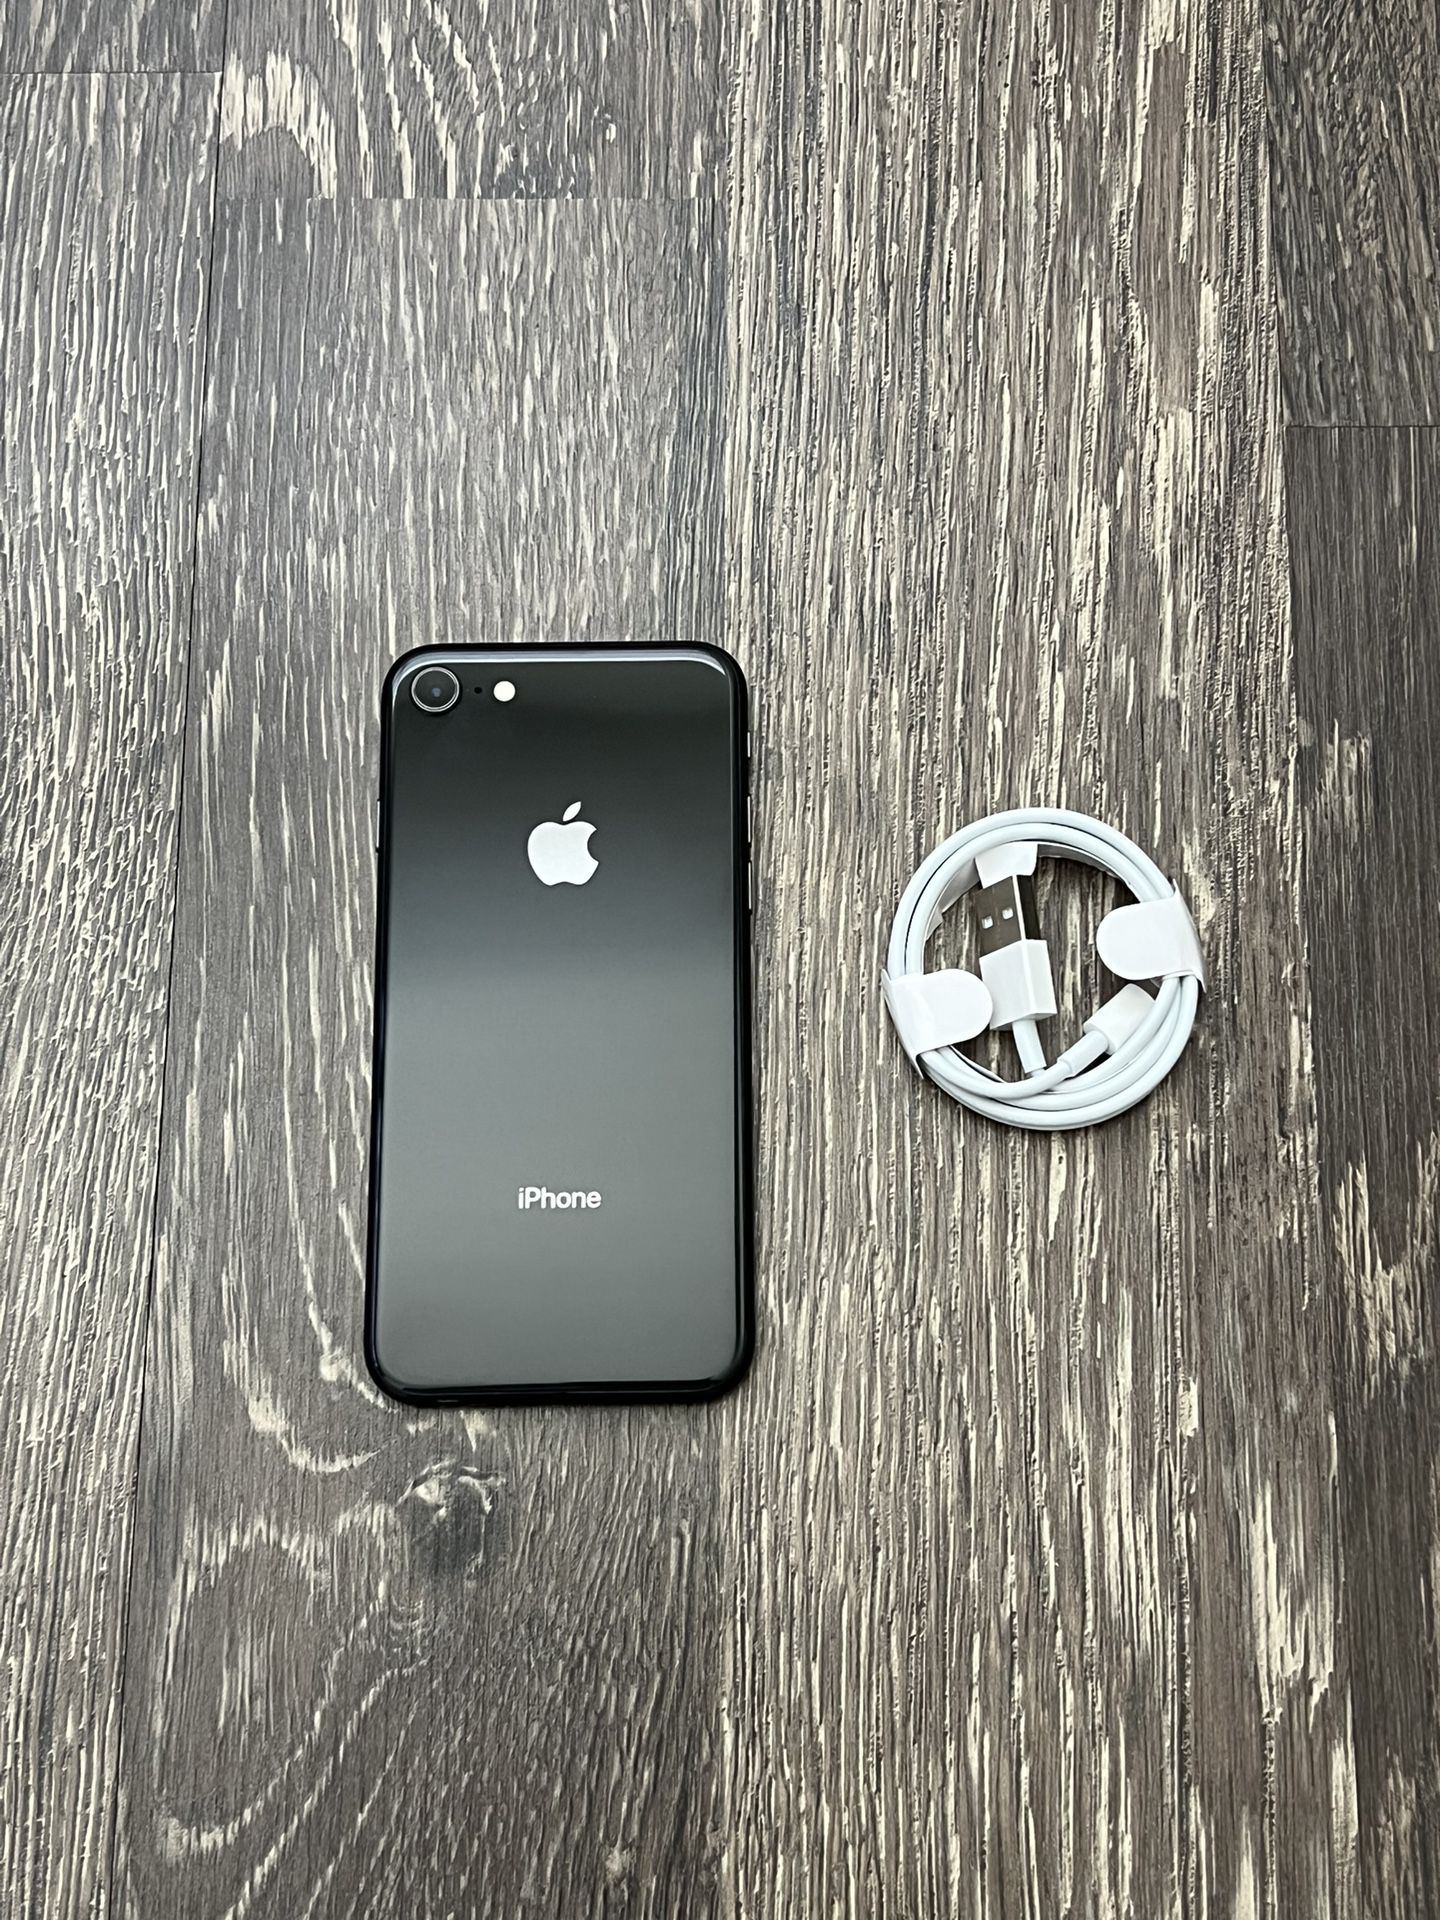 iPhone 8 UNLOCKED FOR ALL CARRIERS!